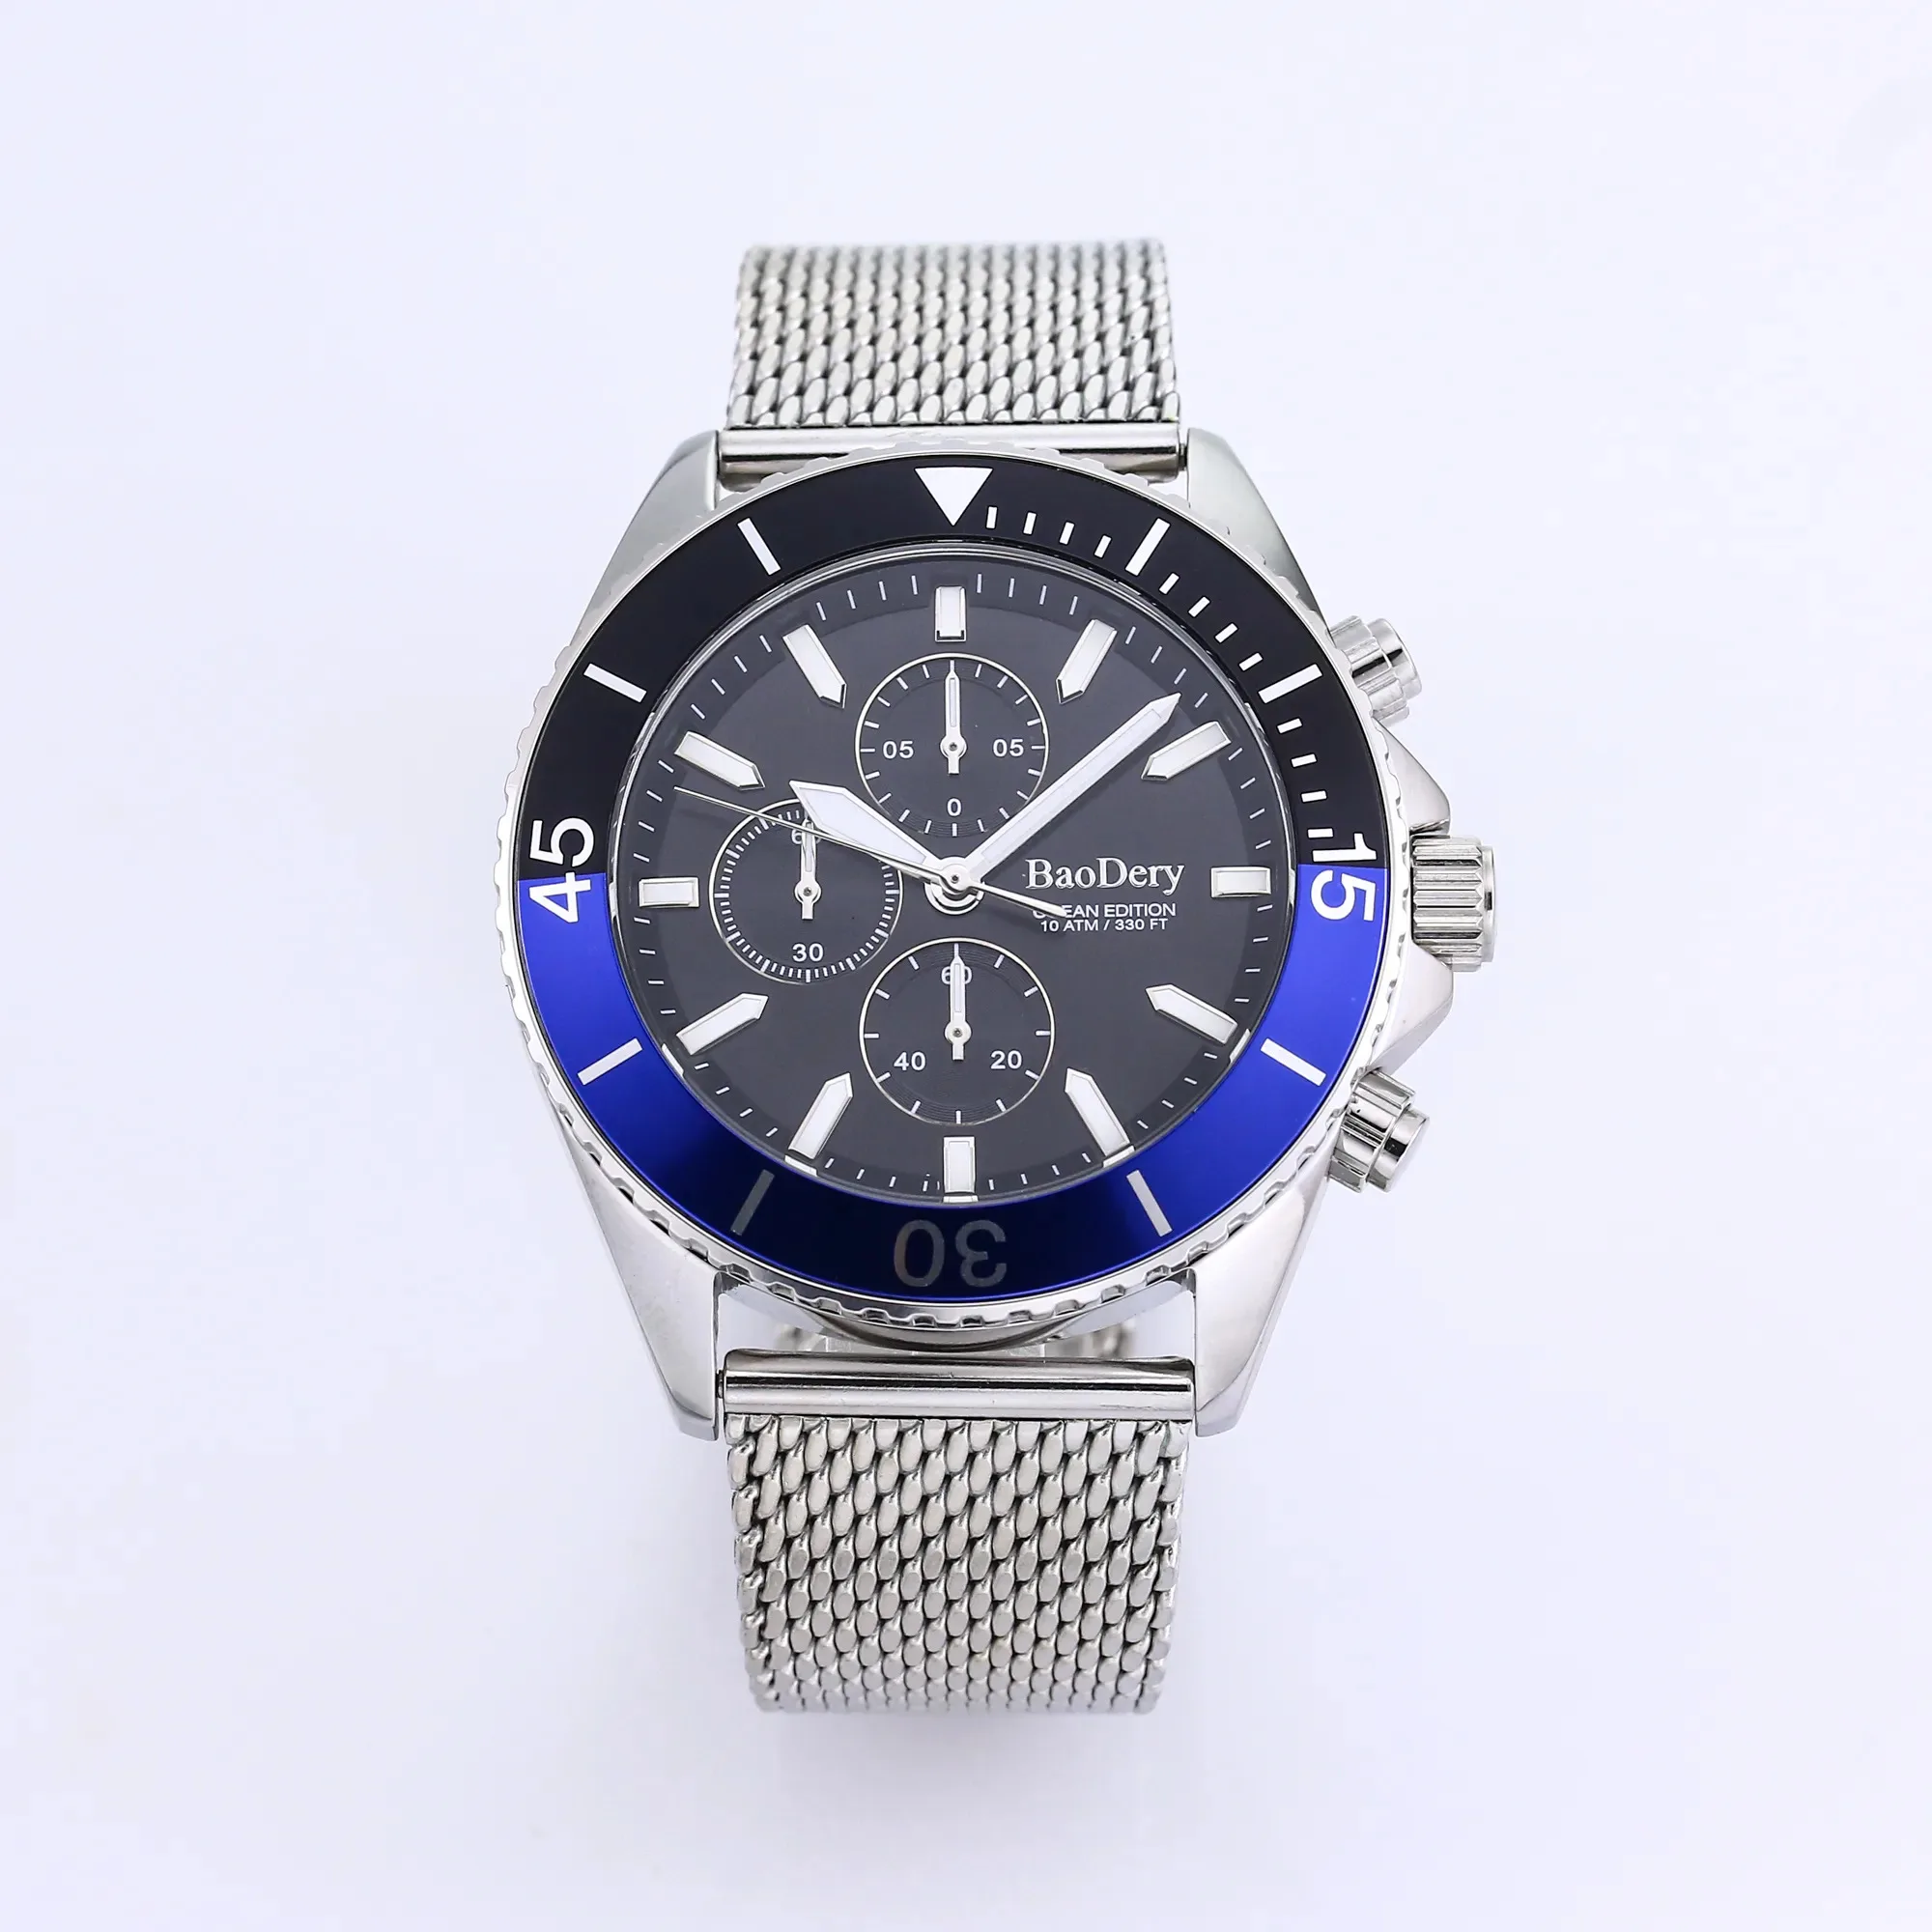 

Men's Watch Chronograph Trophy High Quality Style Fashion Quatz Wristwatches Stainless Steel Watch